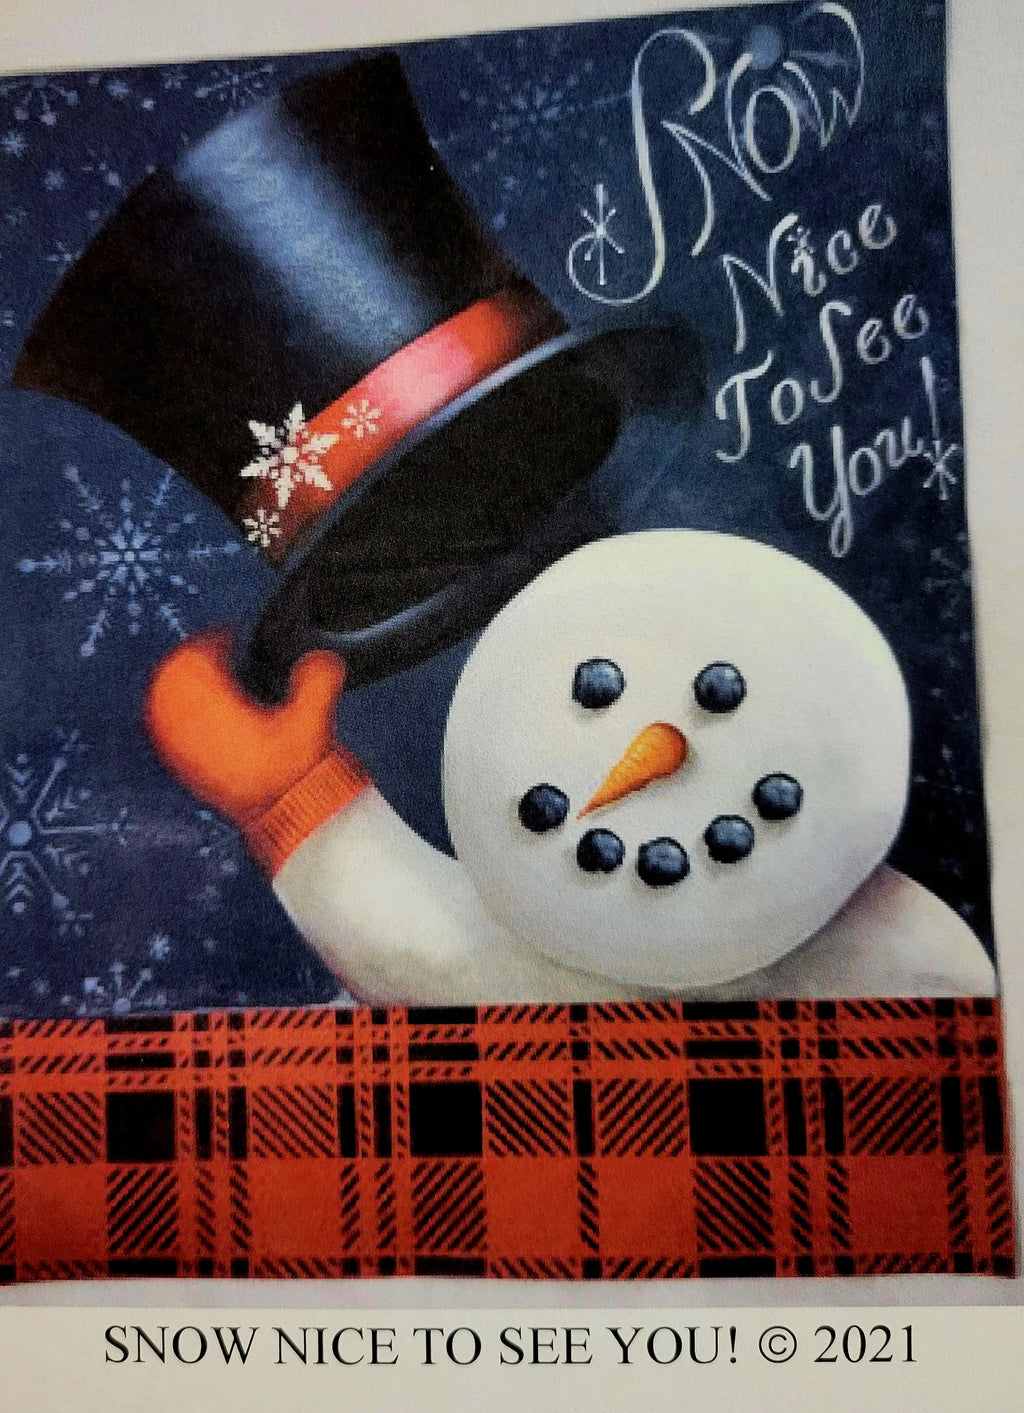 Snow Nice To See You packet by Barbara Bunsey